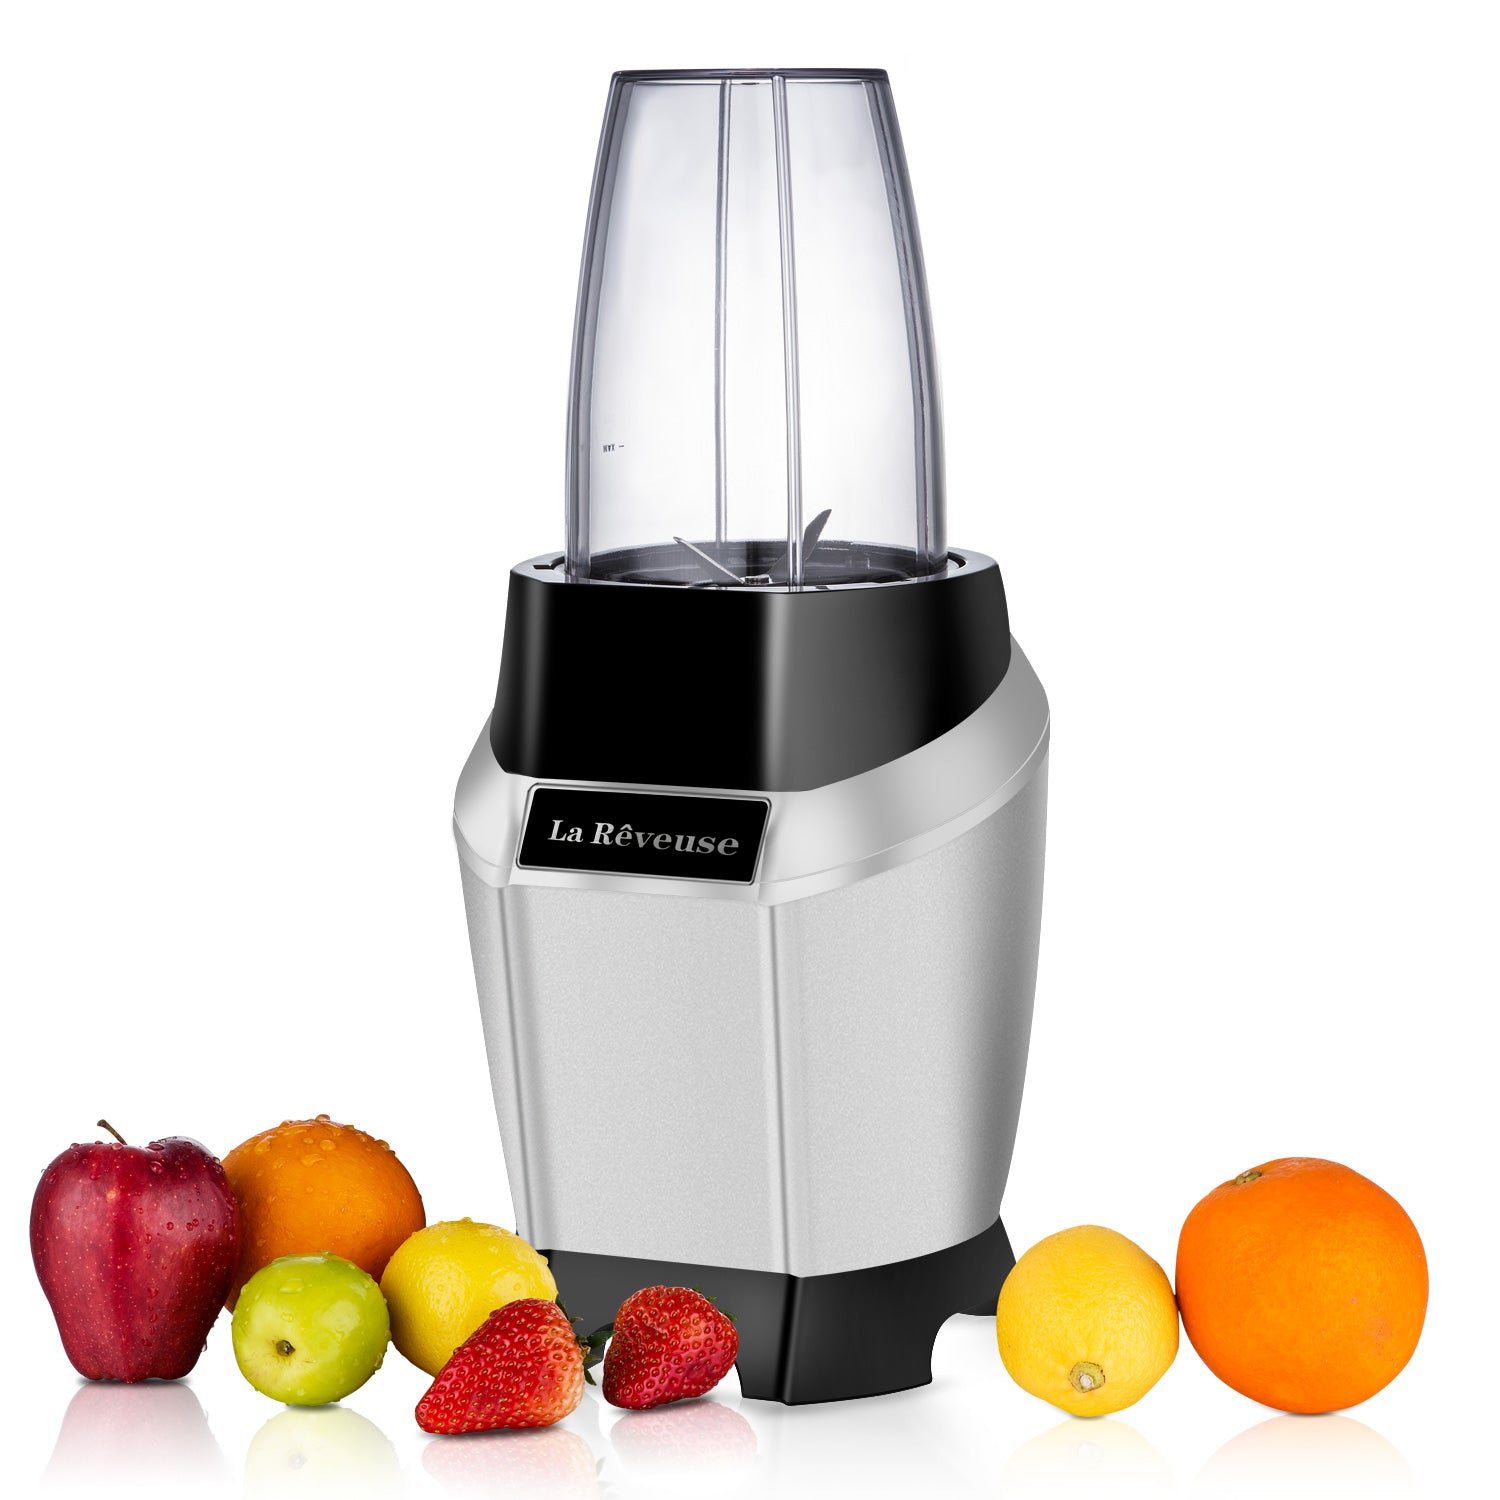  La Reveuse Personal Smoothie Blender 600 Watts with 20